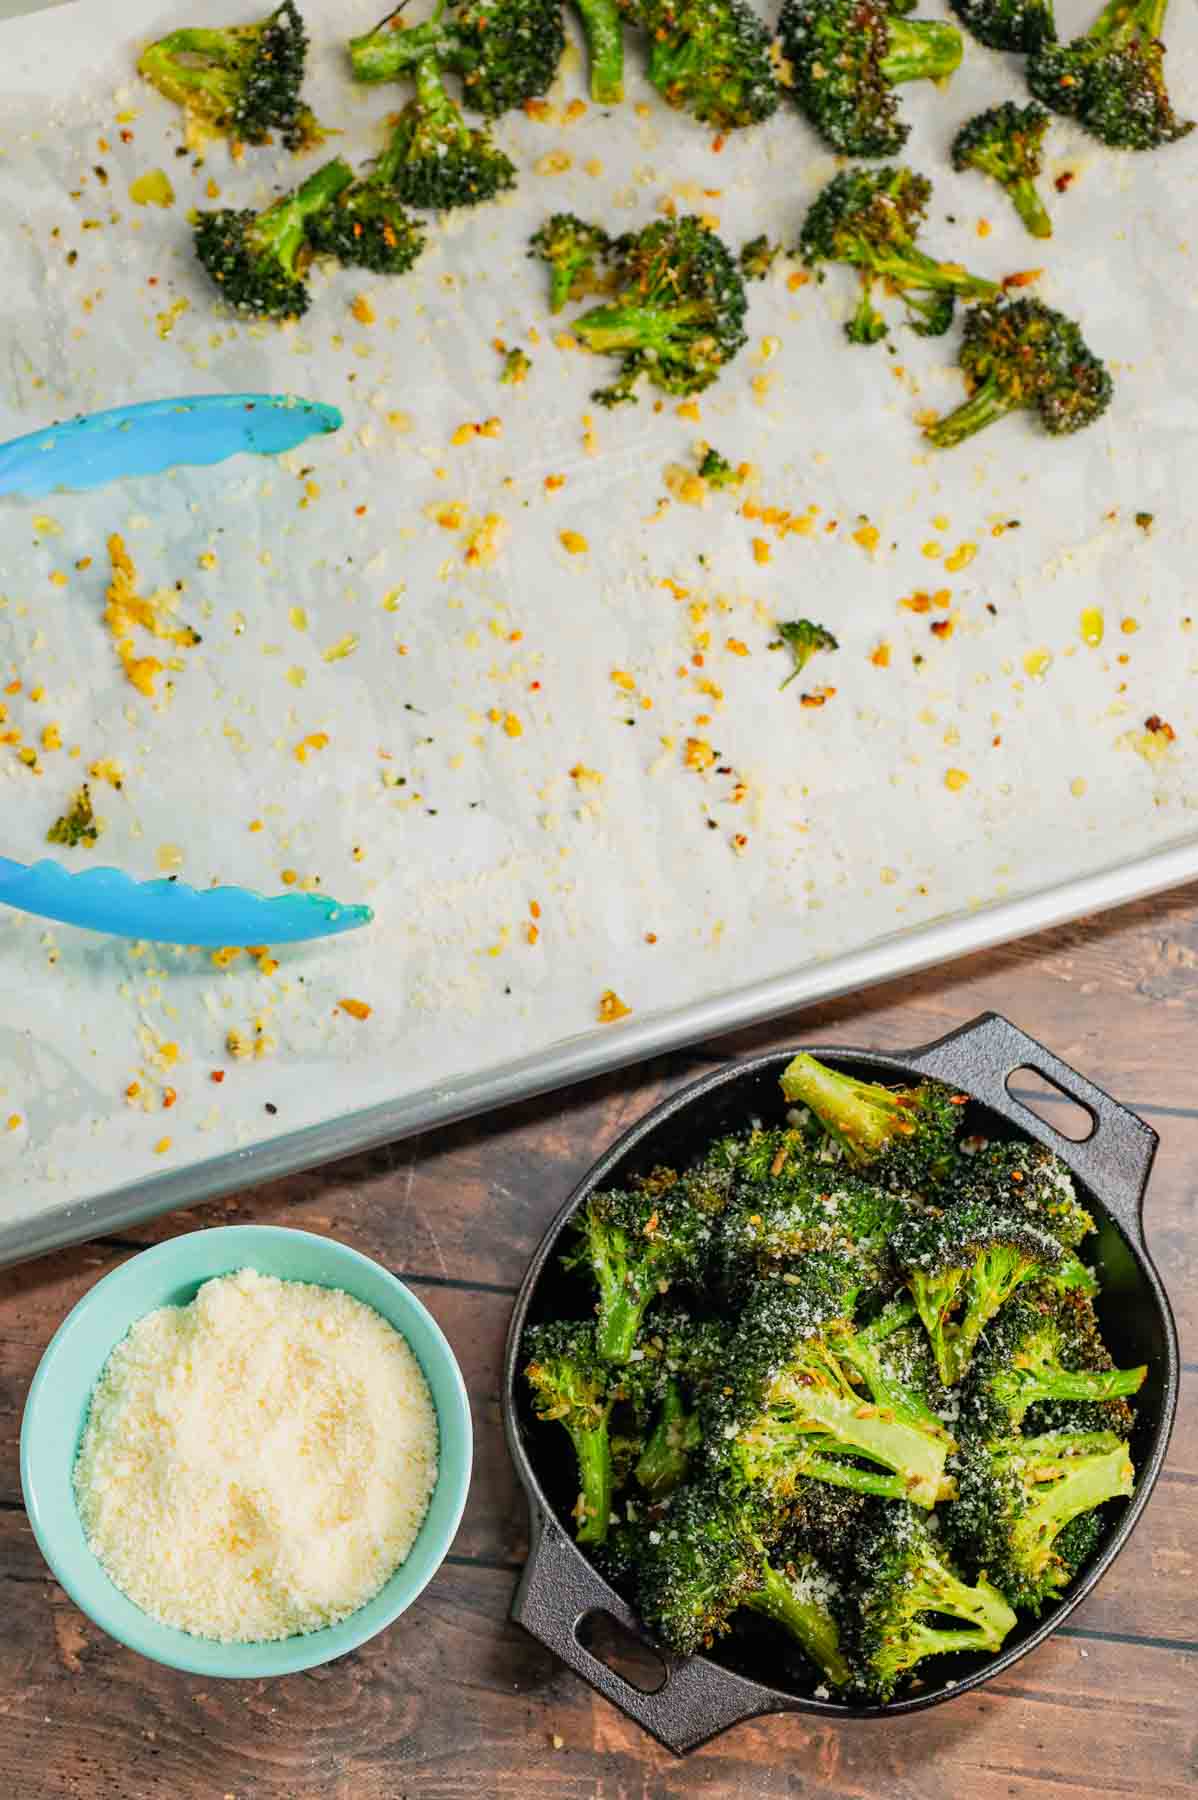 Roasted Broccoli is a simple and delicious side dish made with broccoli florets tossed in olive oil, minced garlic, salt, pepper, Italian seasoning and parmesan cheese and roasted until tender and slightly crispy.